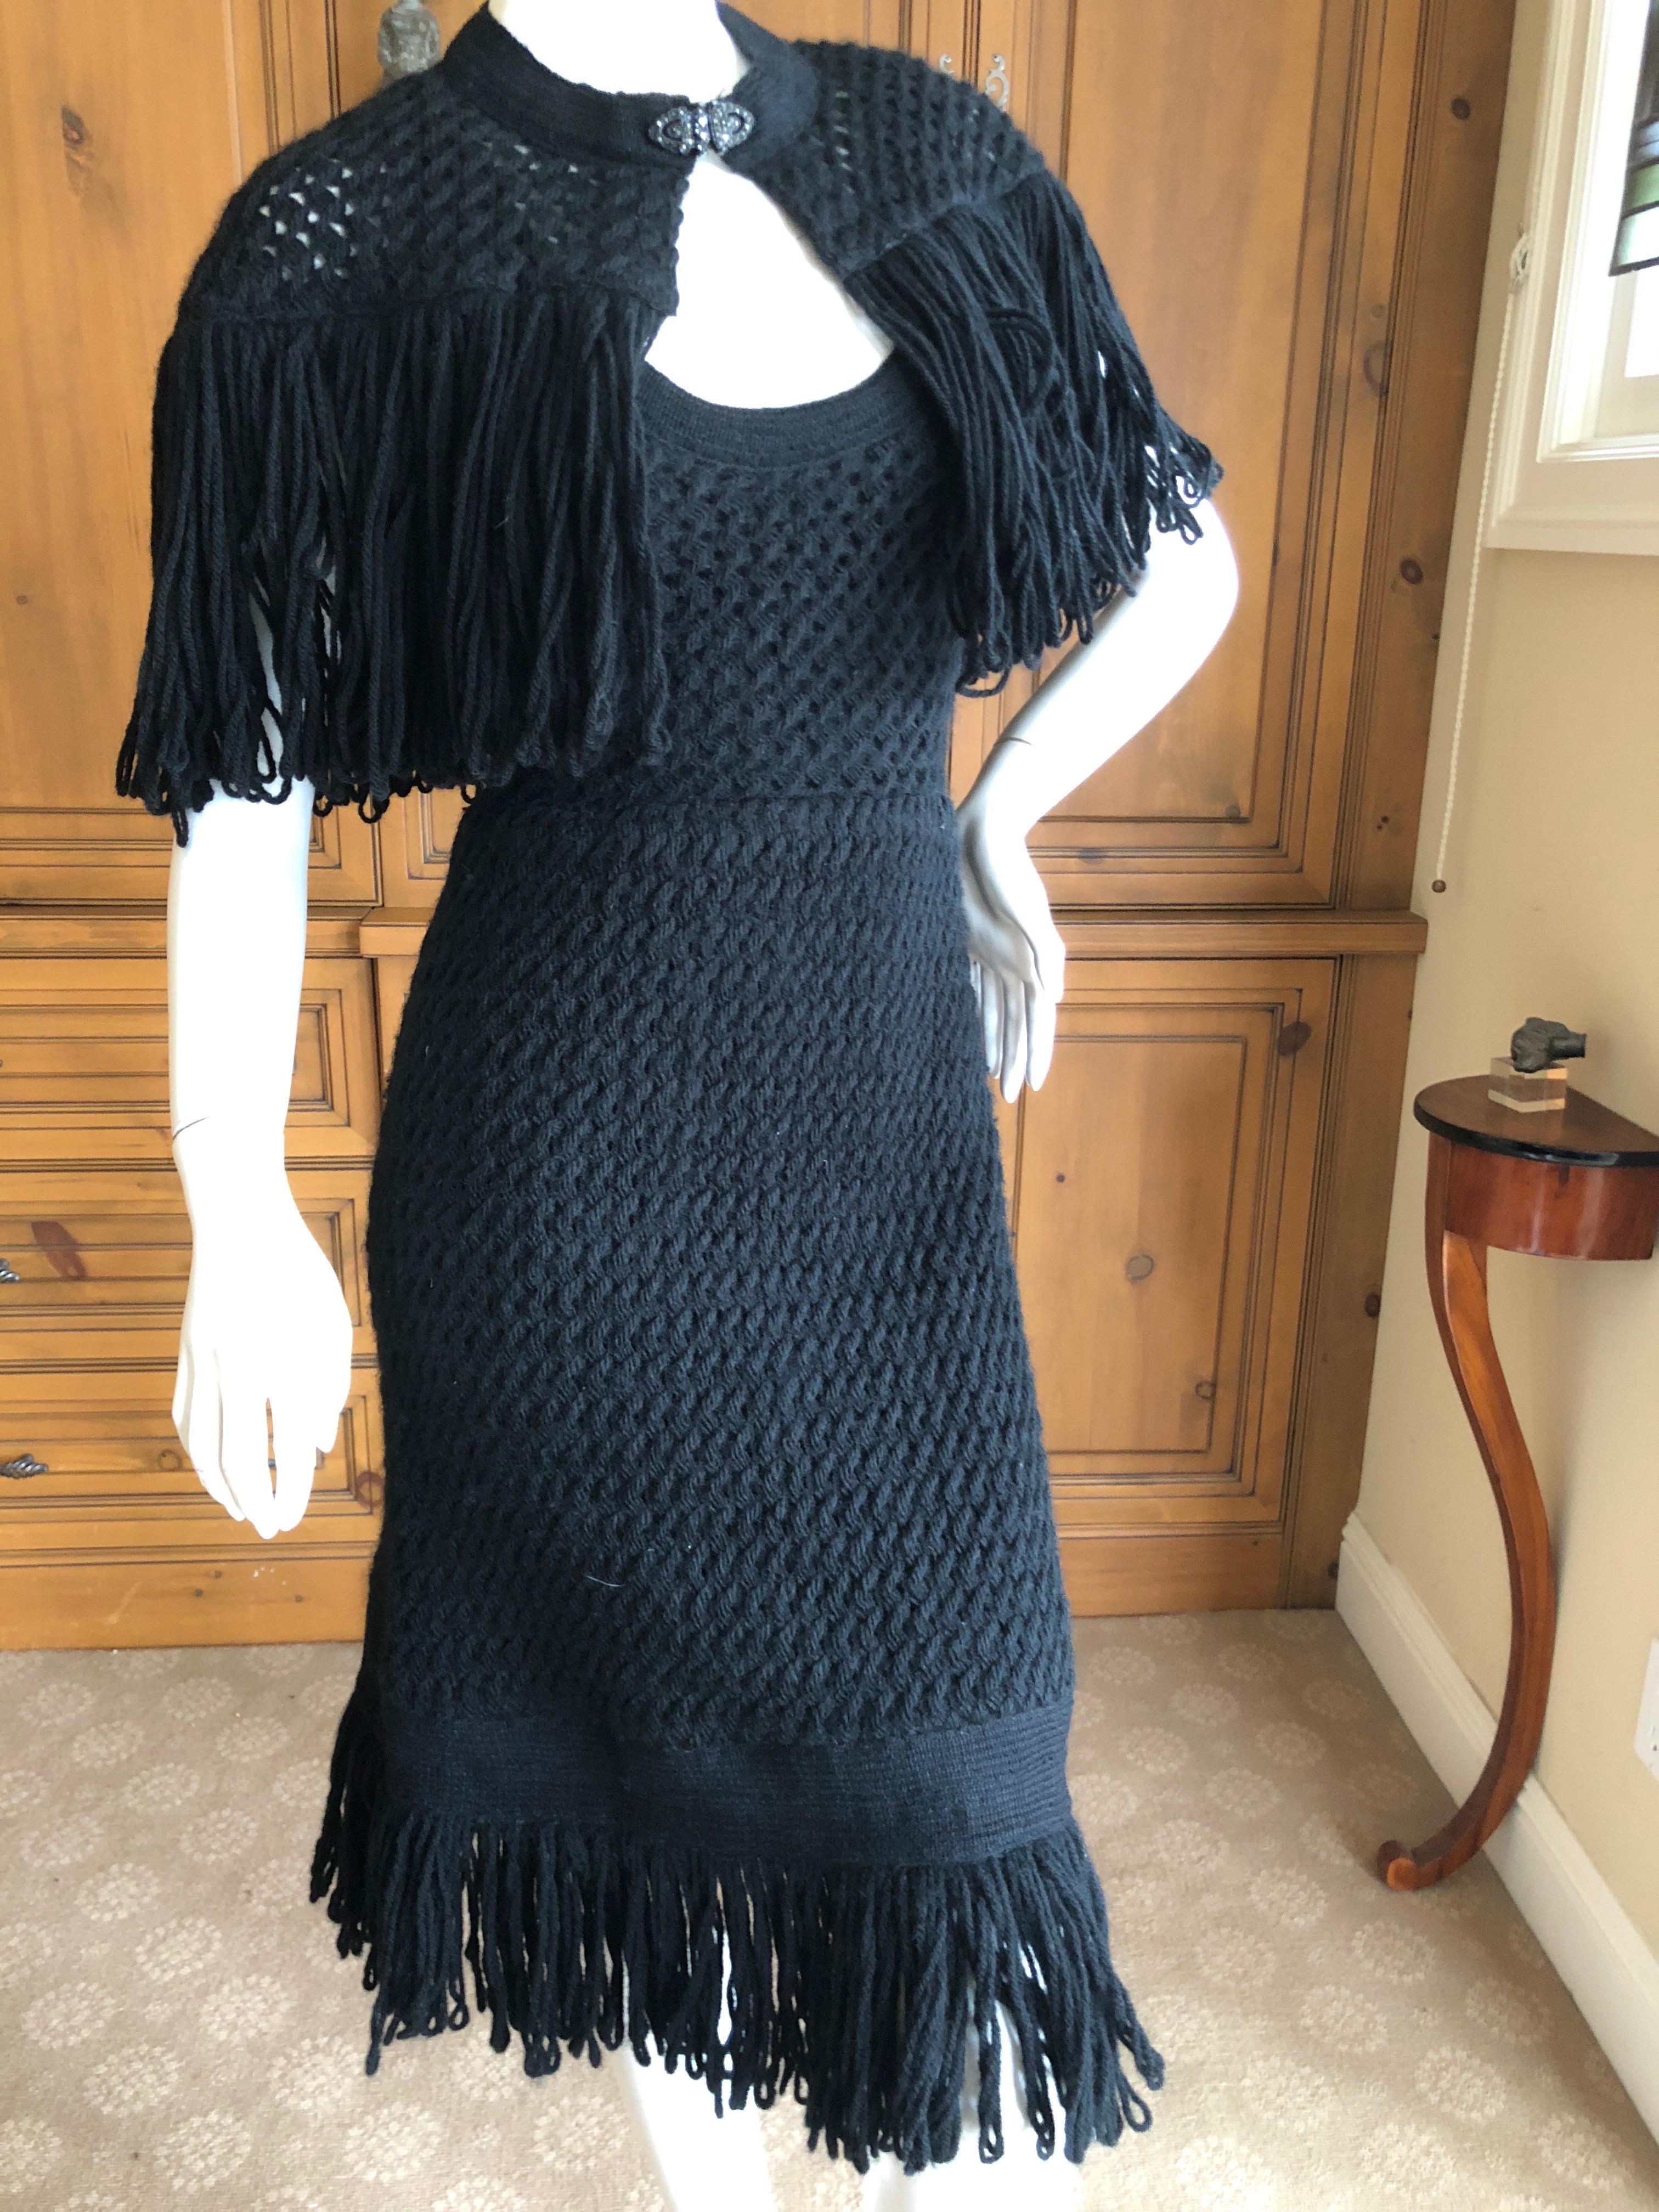 Cardinali Black Silk Lined Crochet Dress with Matching Fringed Shawl Fall 1971  For Sale 5